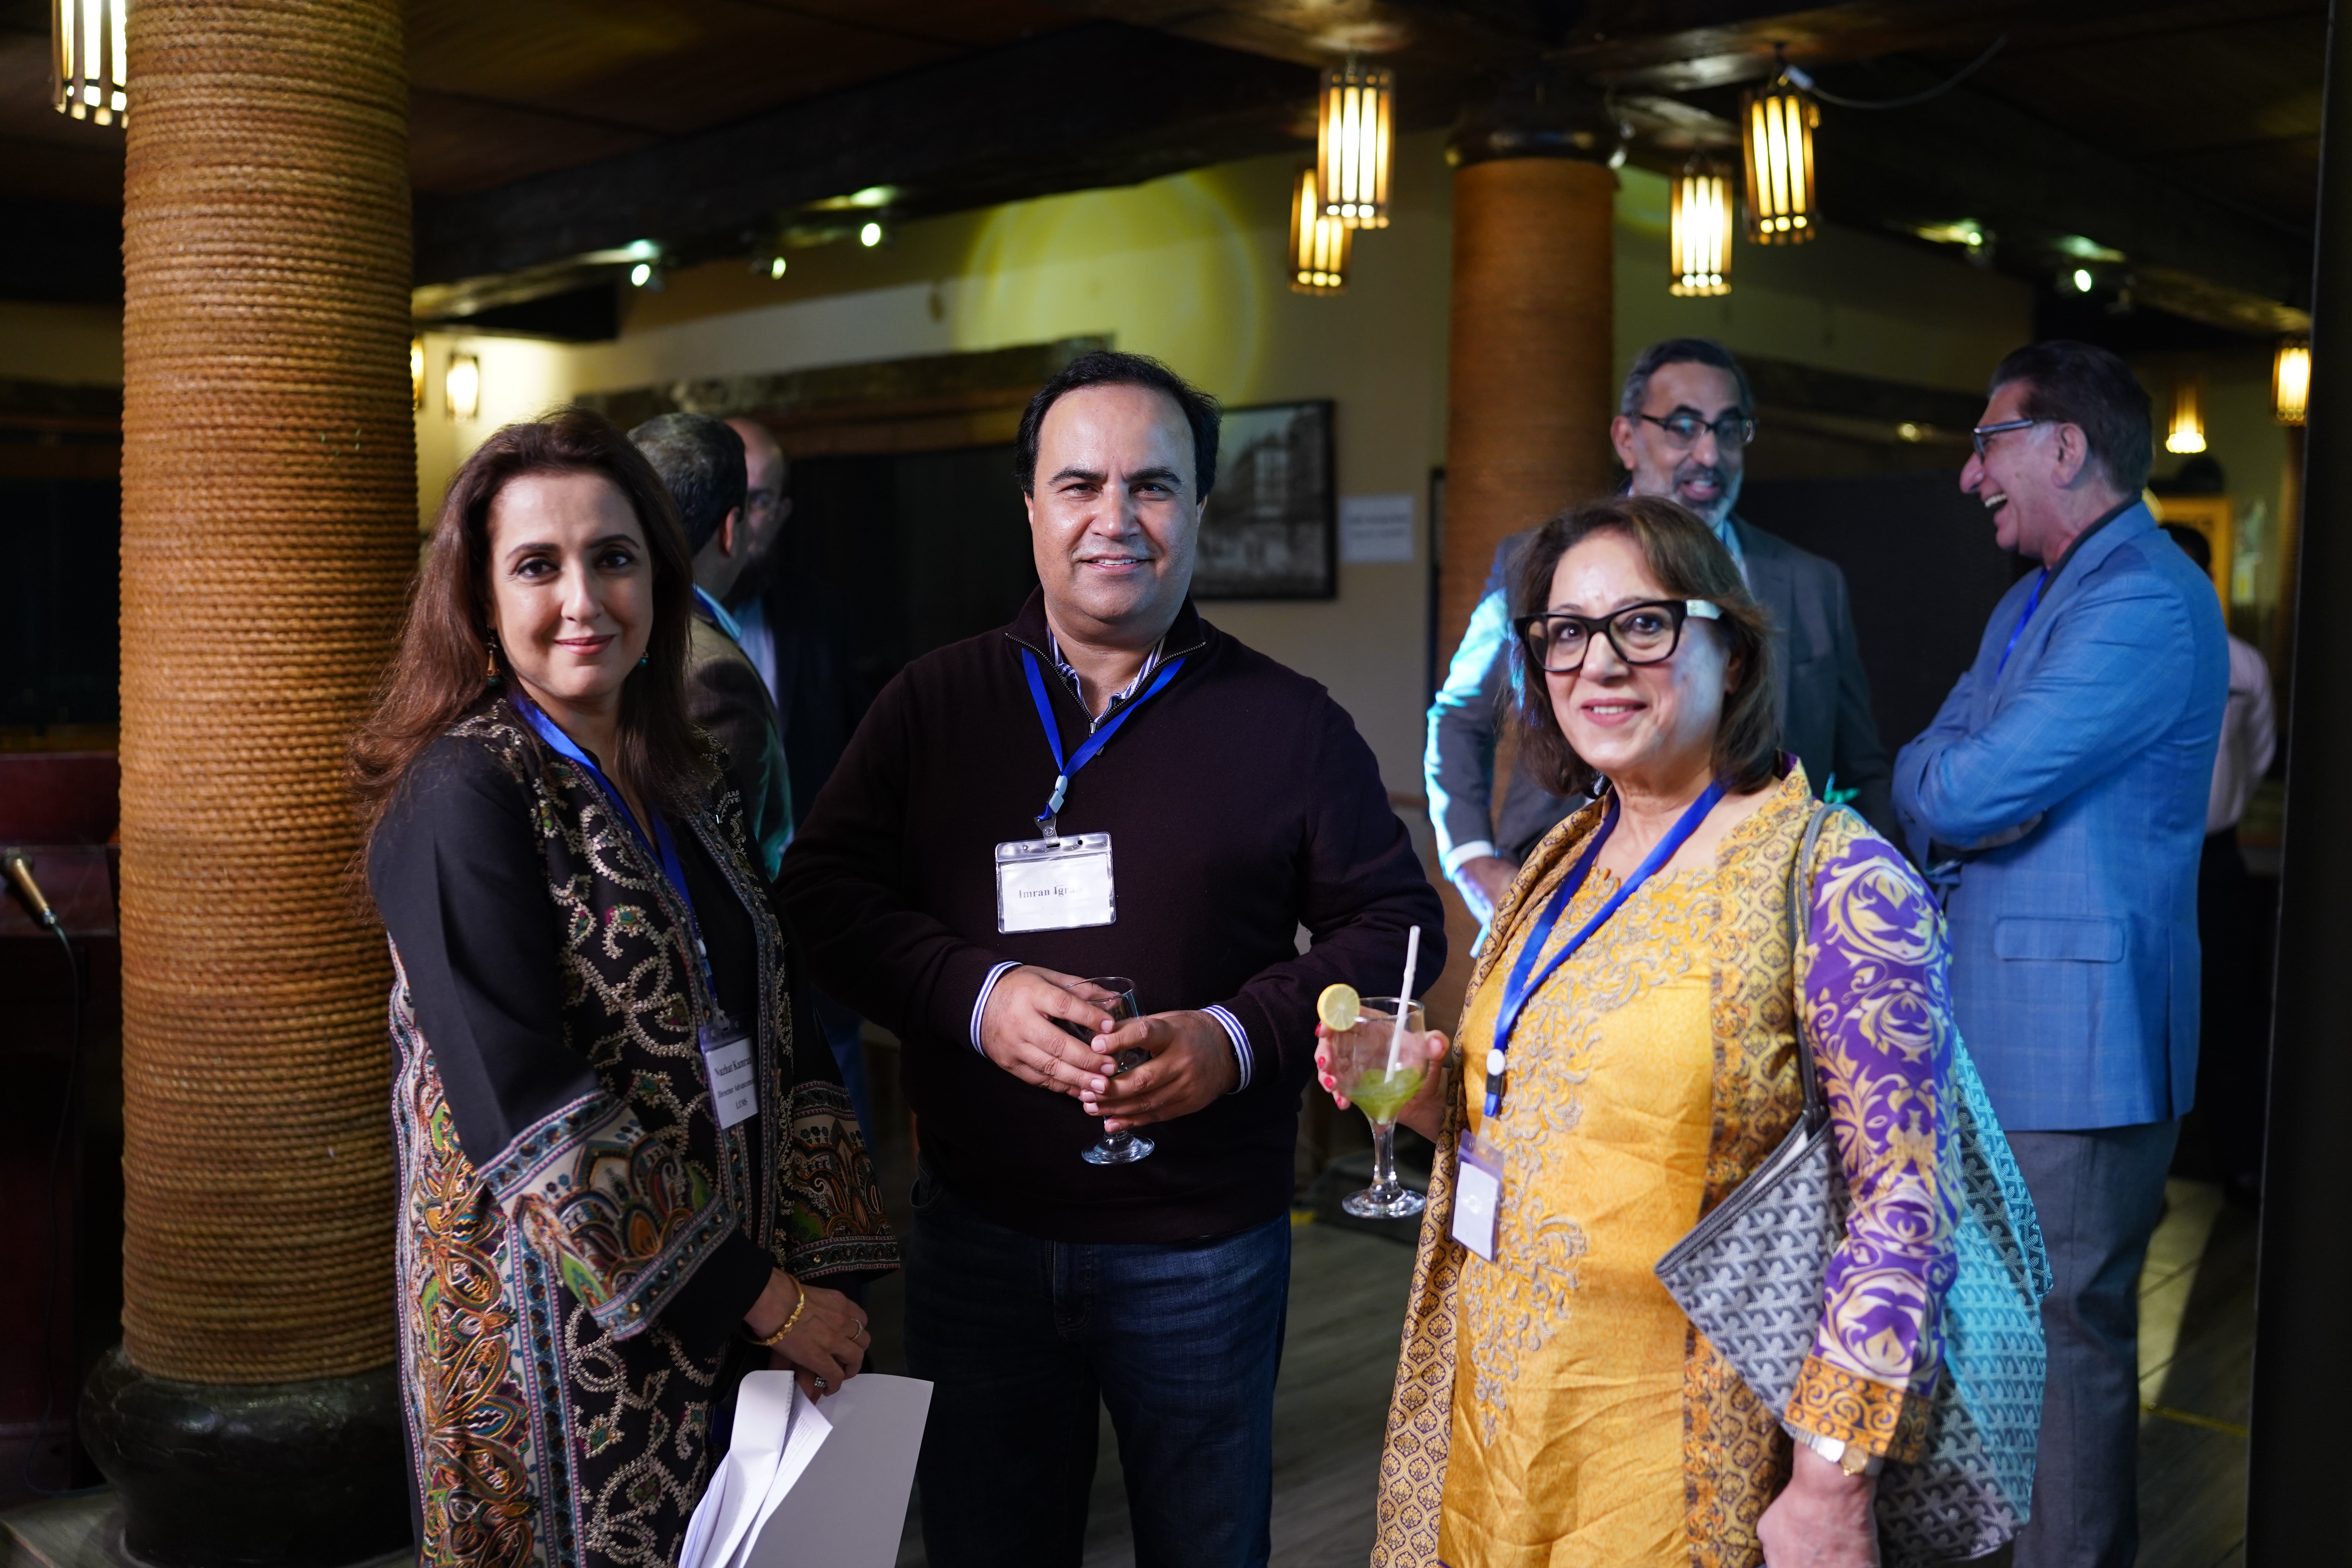 Awardees networking with Vice Chancellor, Dr. Arshad Ahmad over welcome drinks